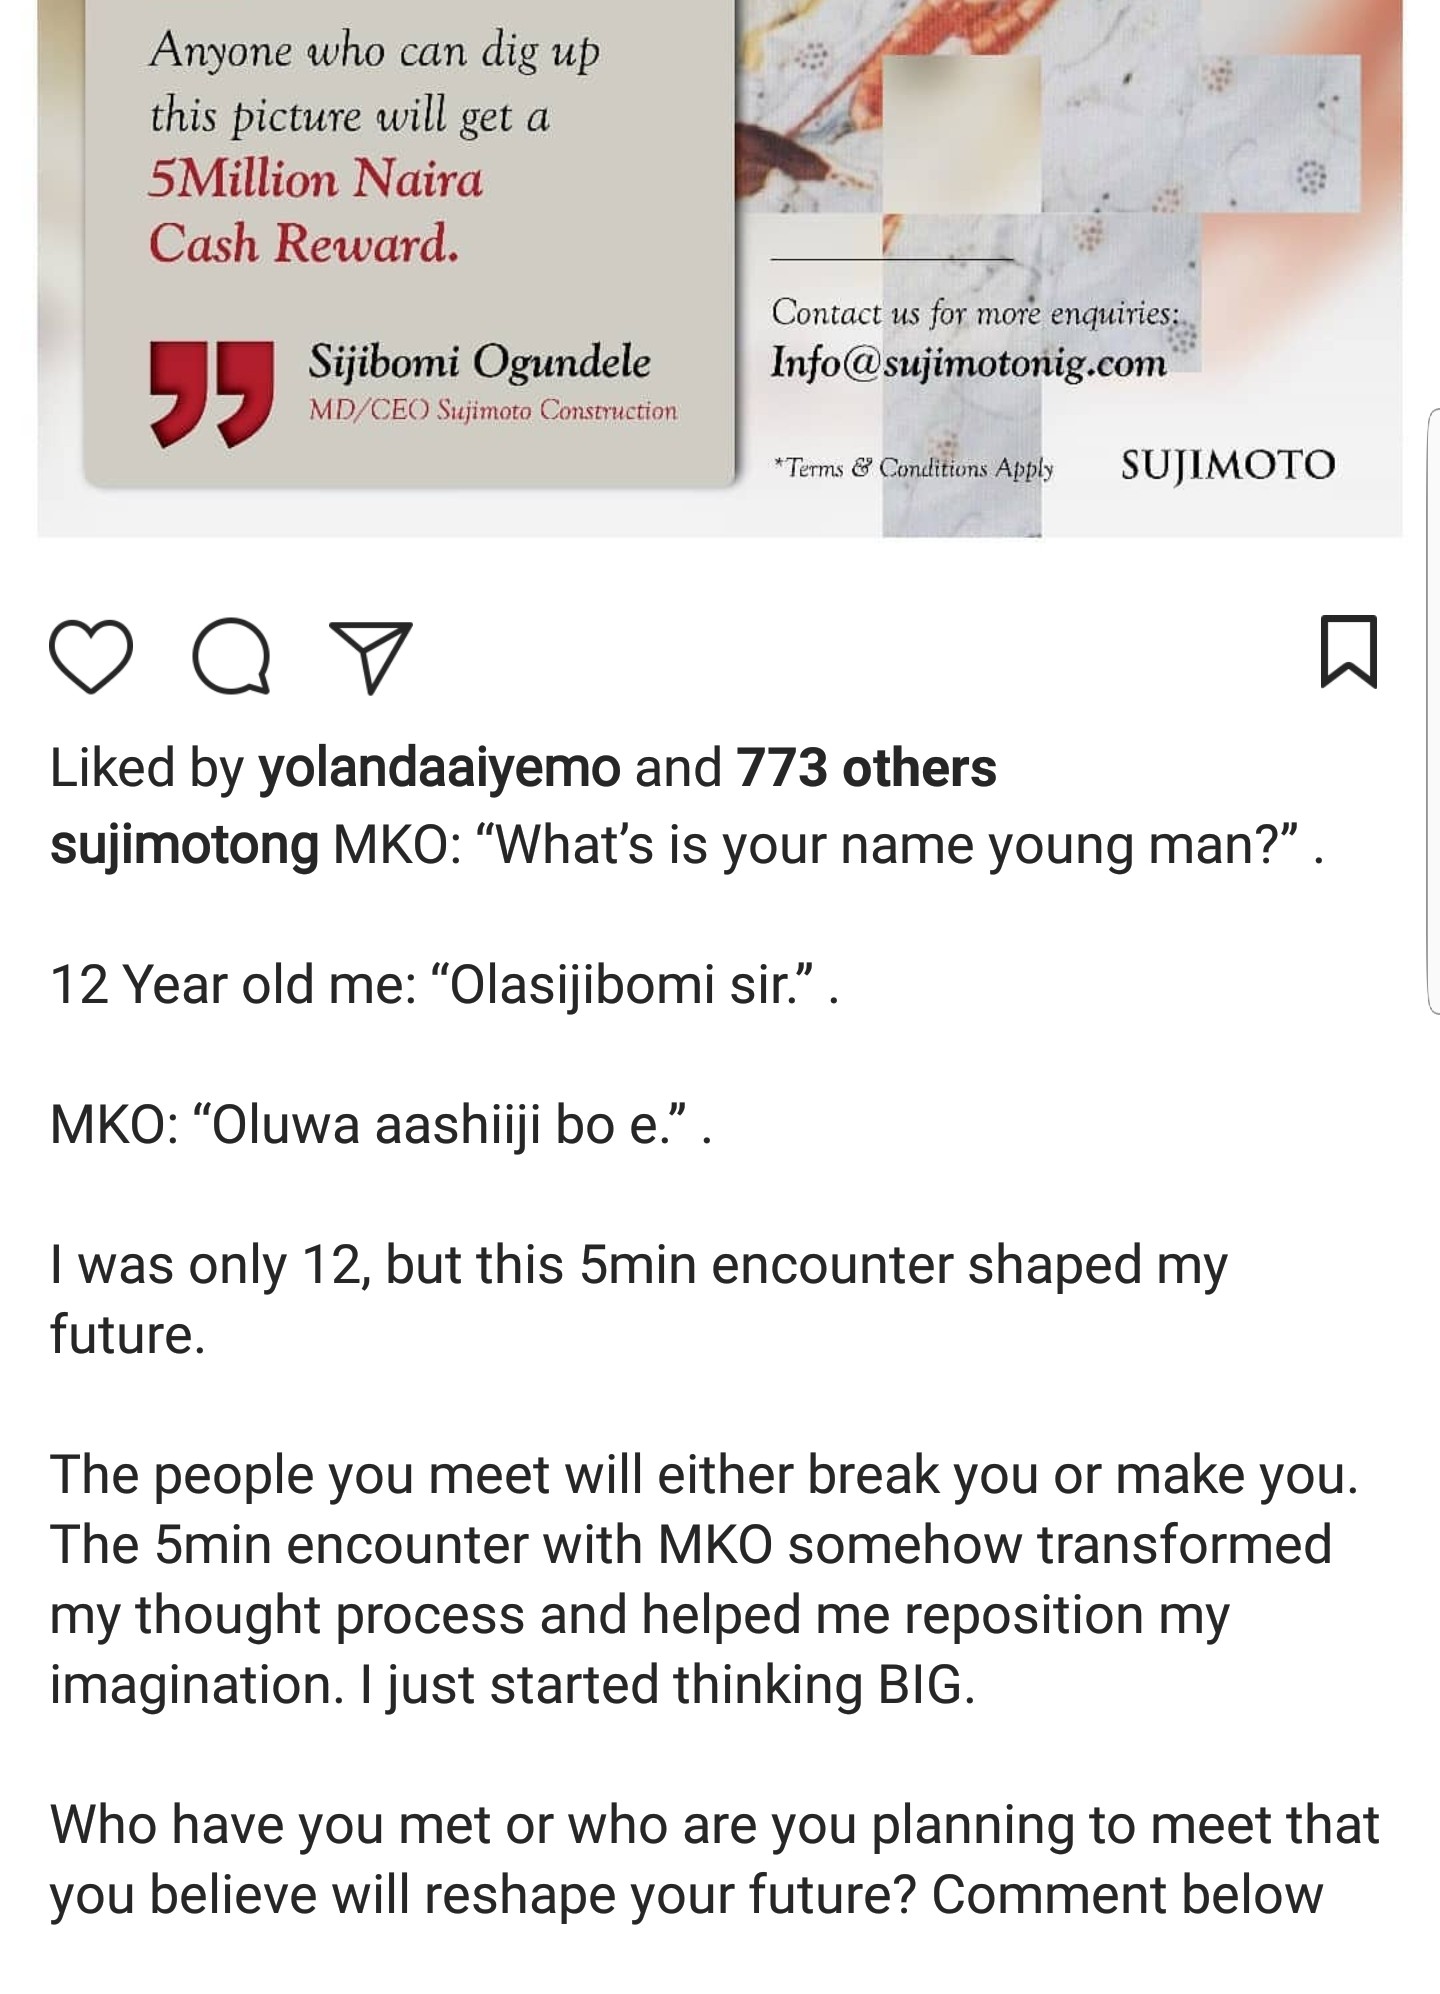  Sujimoto is offeriing N5million to anyone who can present a 1993 photo of him with MKO Abiola